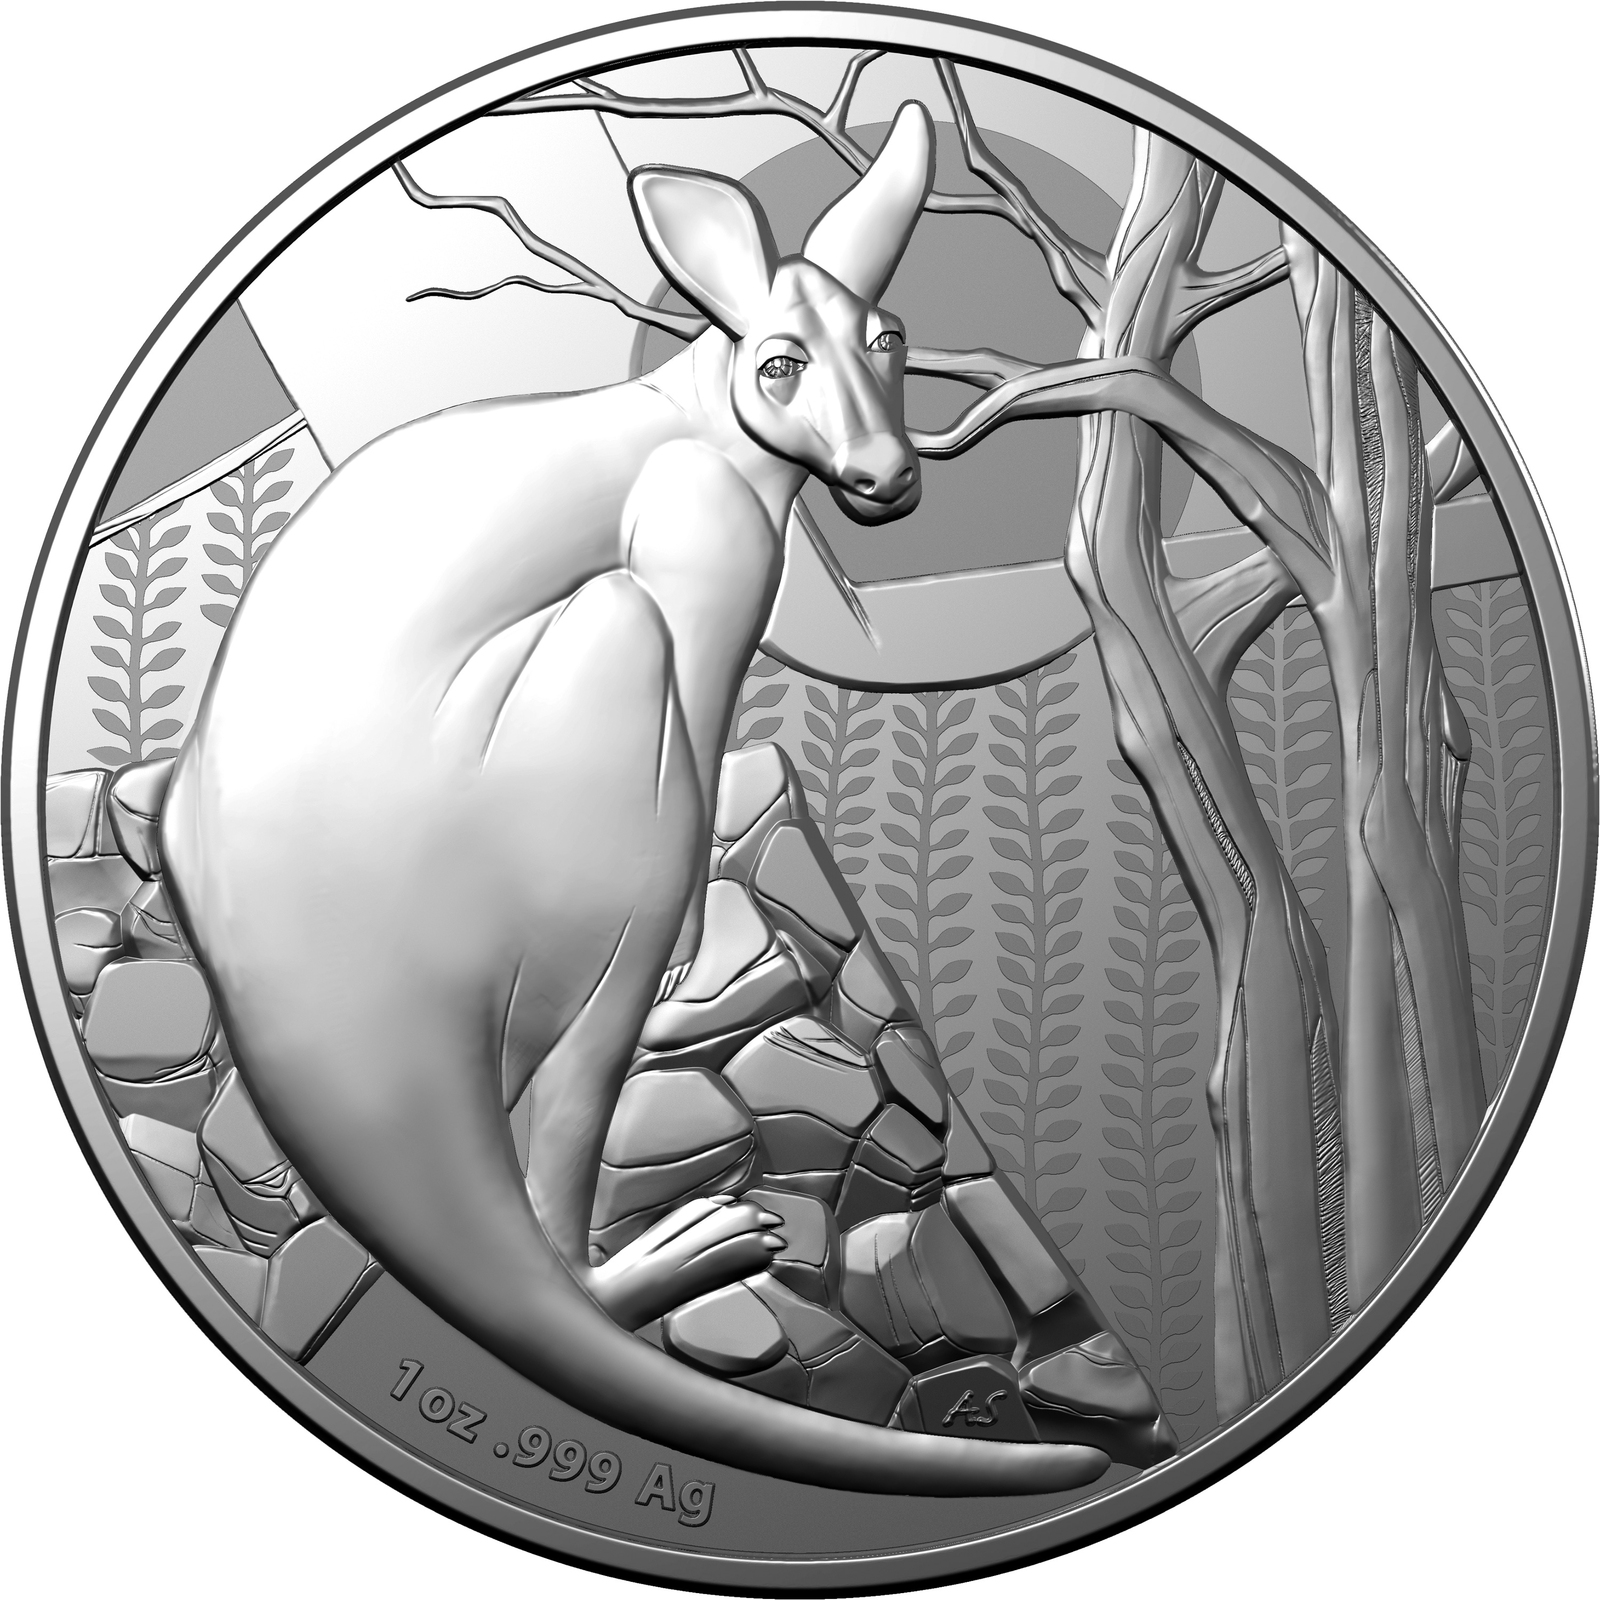 2022 $1 Kangaroo Impressions of Australia Silver Frosted UNC